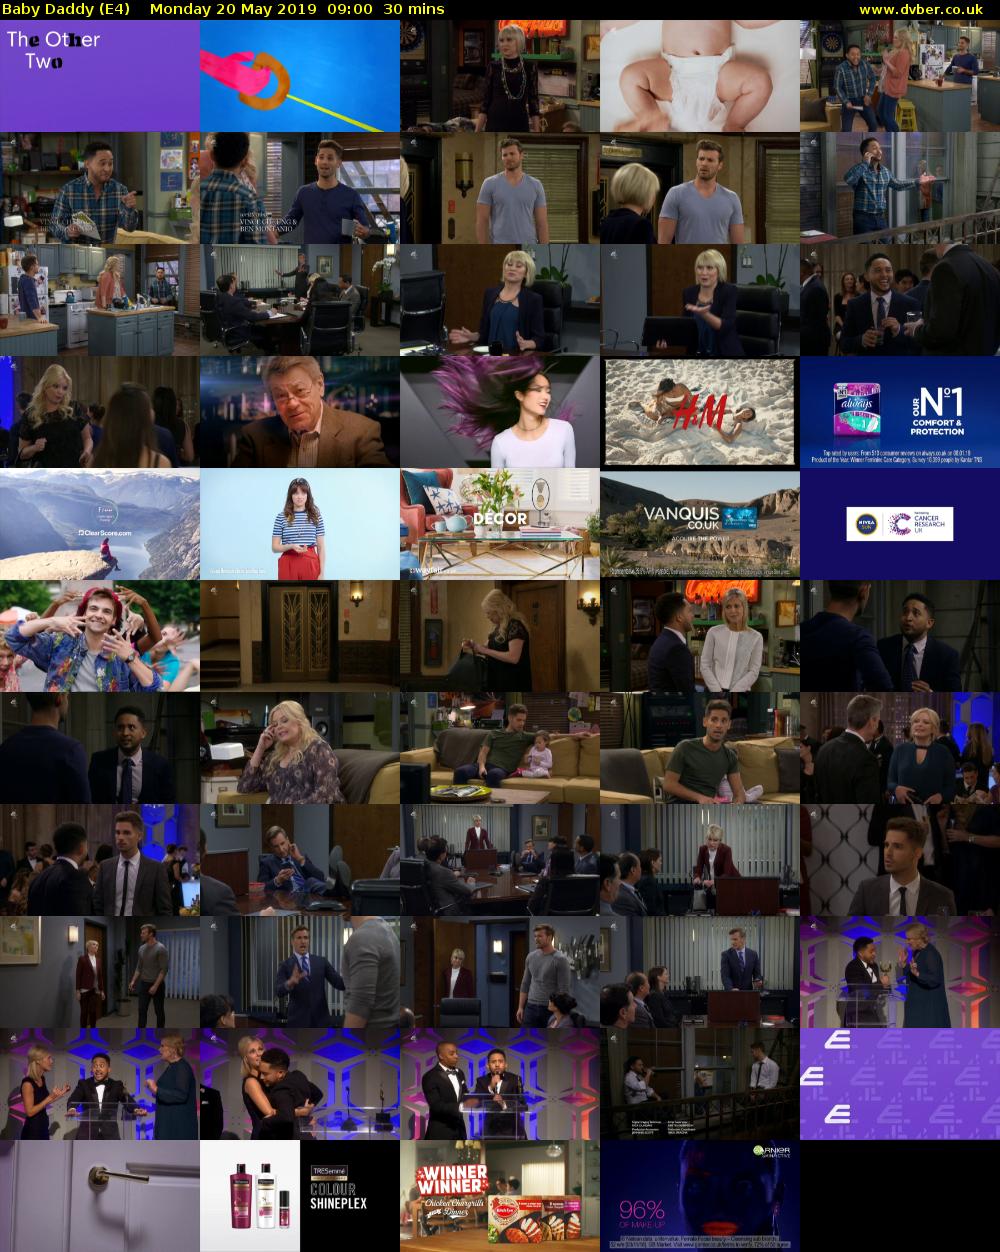 Baby Daddy (E4) Monday 20 May 2019 09:00 - 09:30